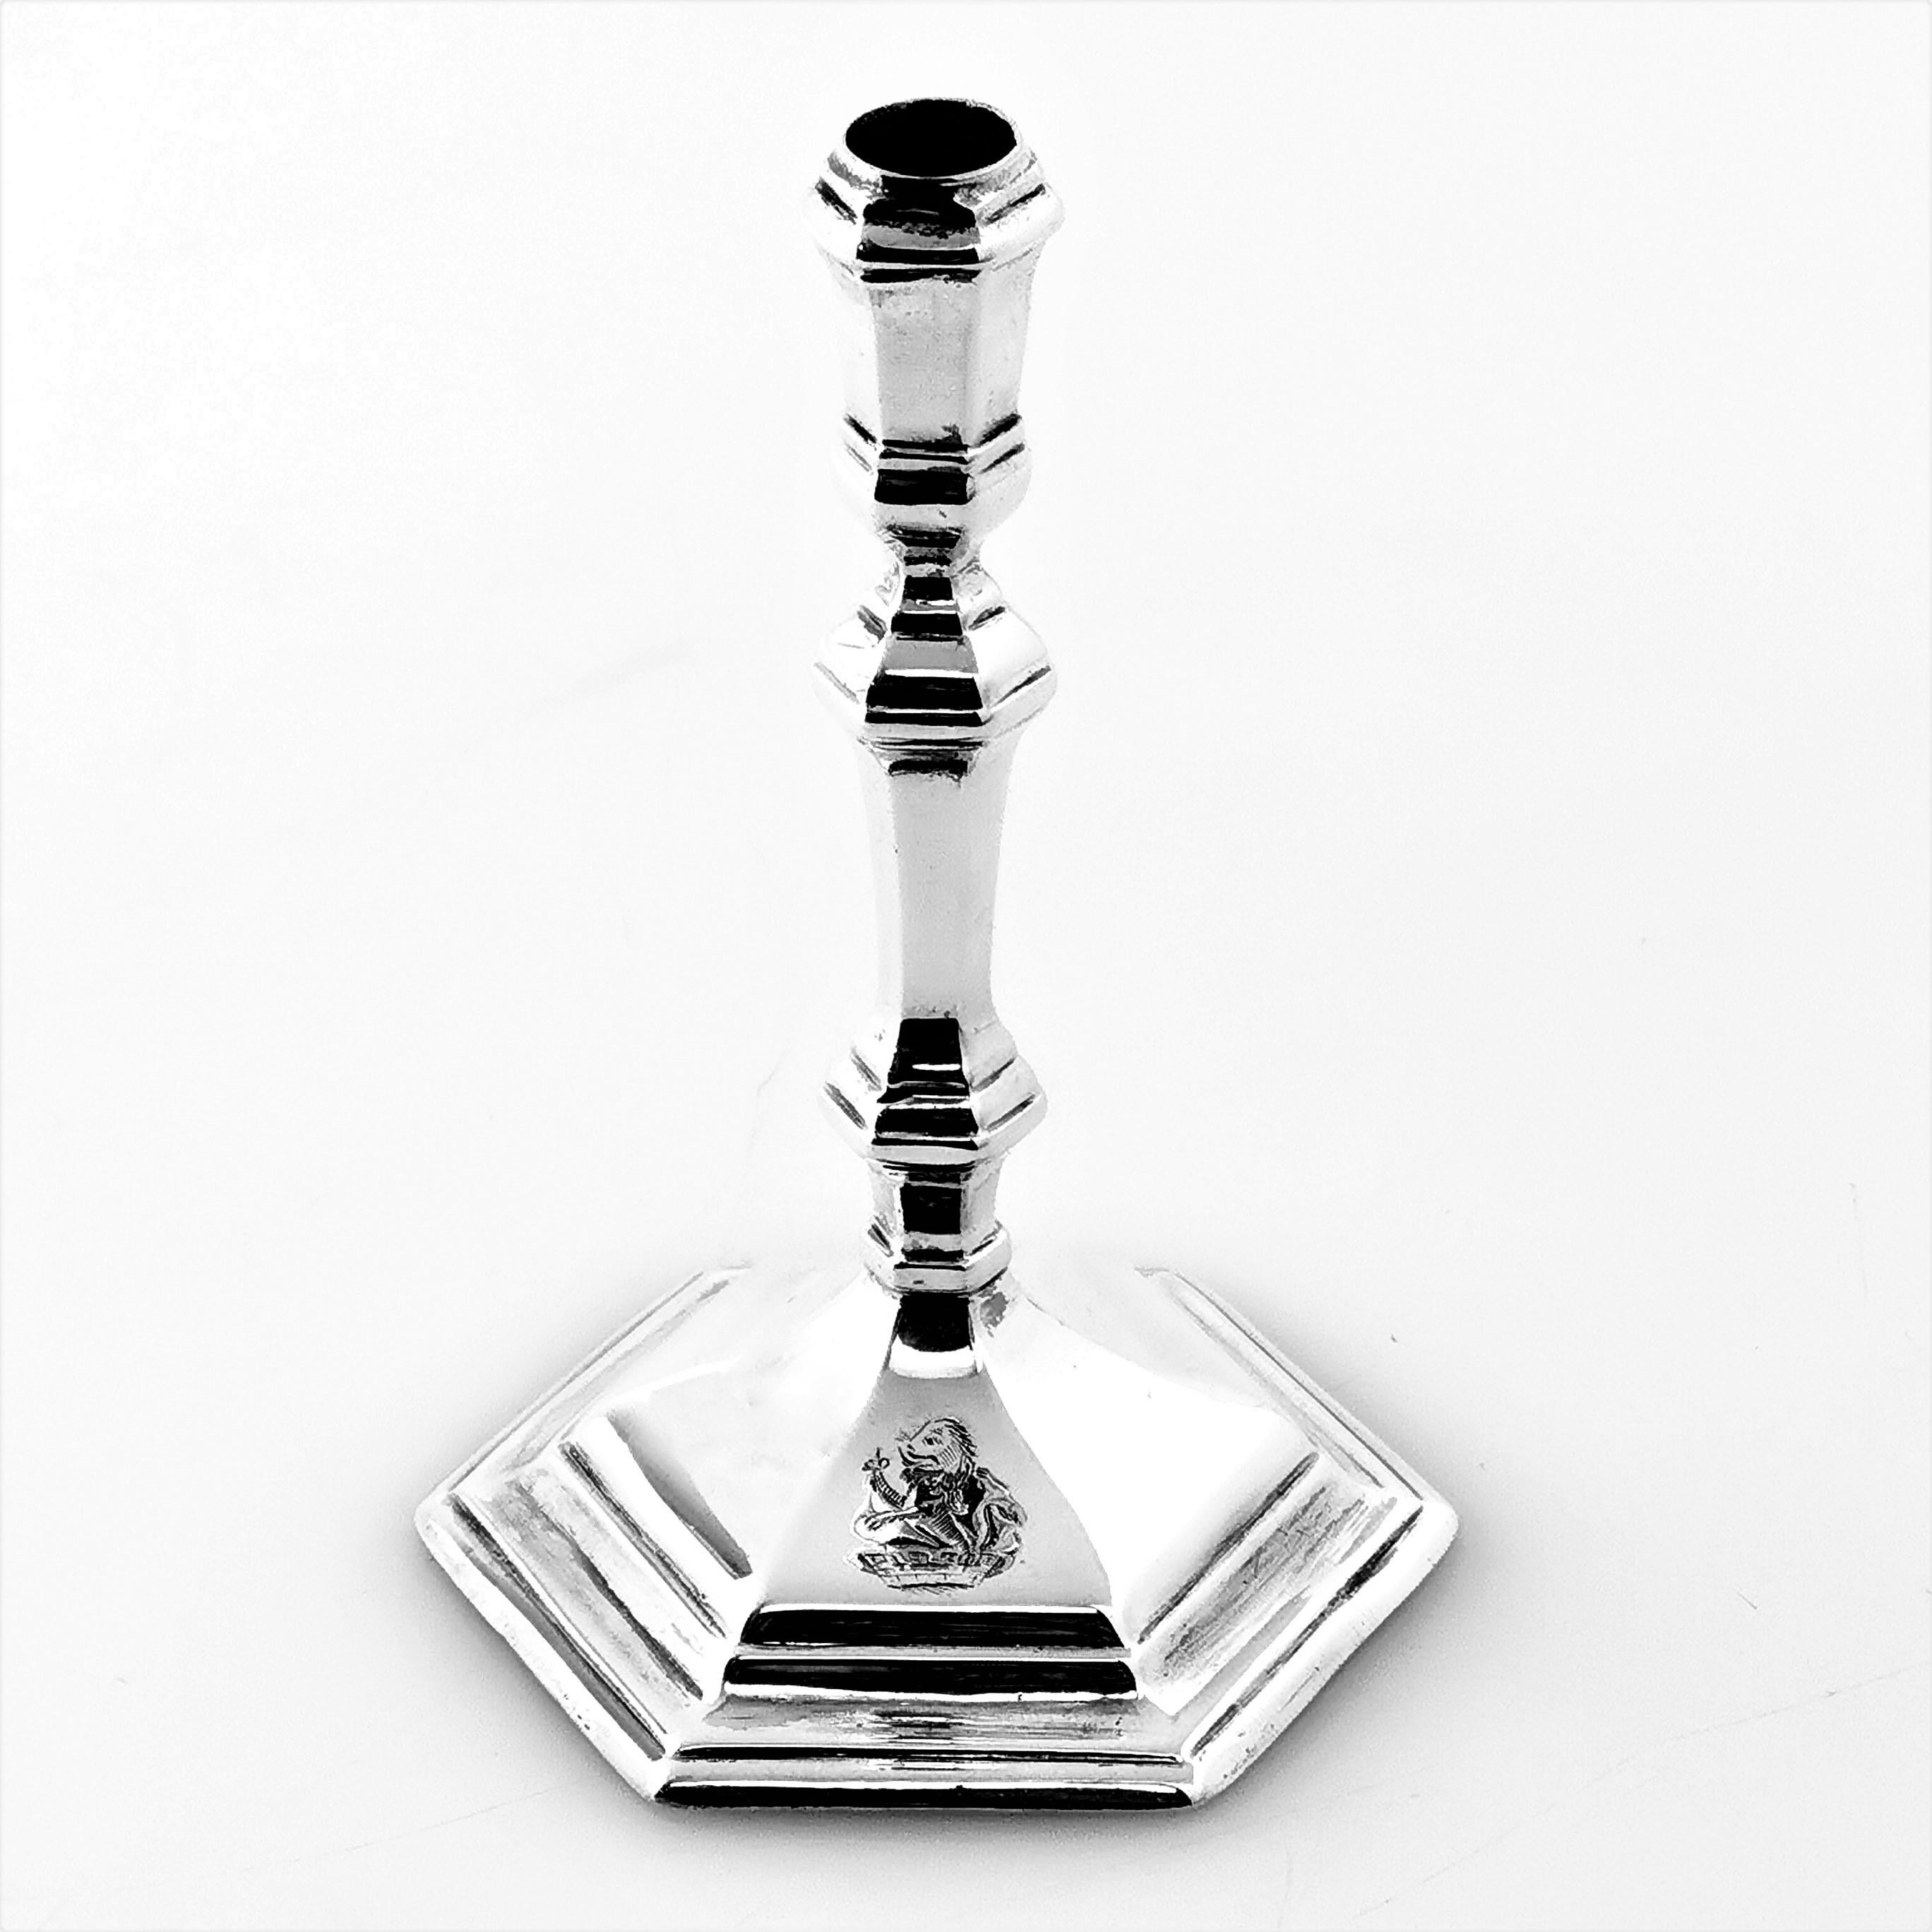 A classic Antique George I solid Britannia Silver Taper Stick with a hexagonal base. The Candlestick has a knopped column and features a small engraved crest on one panel. The Taper Stick has the initials CB over MS engraved on the underside.

Made